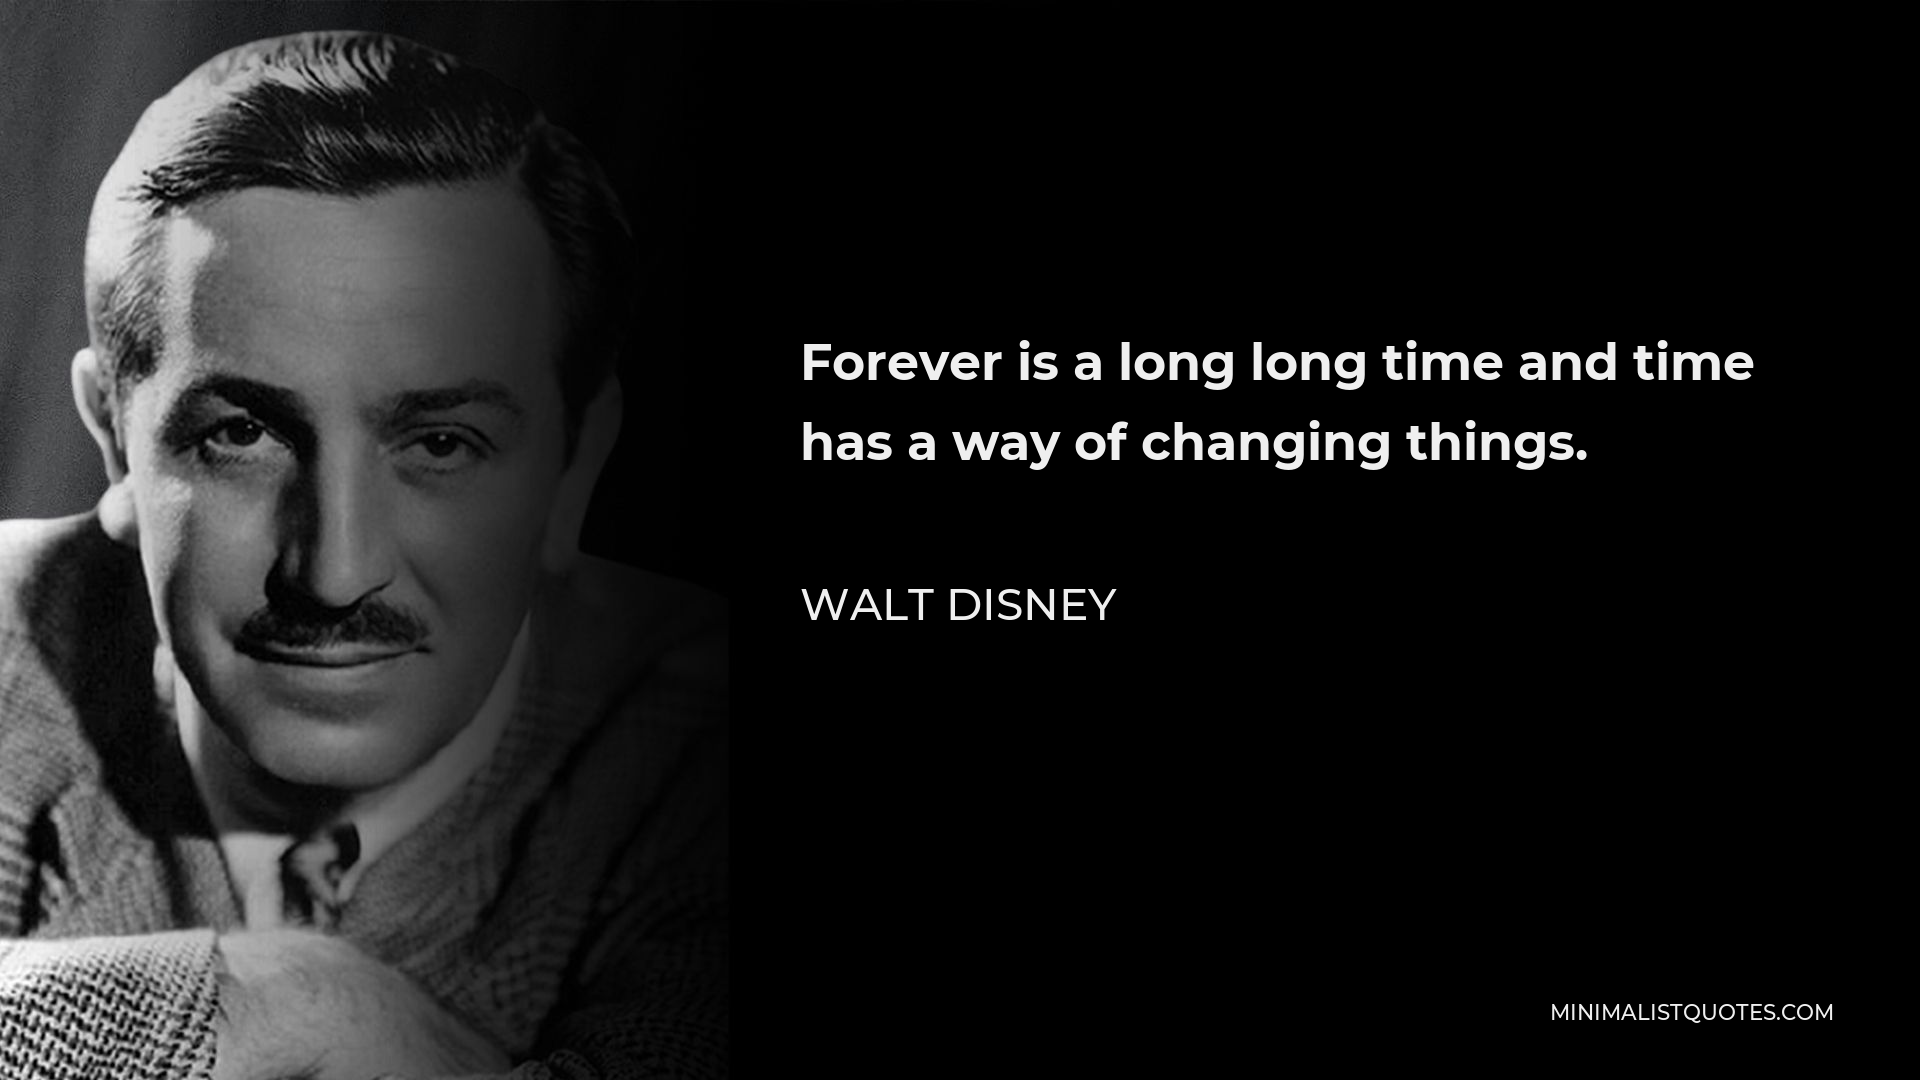 Walt Disney Quote - Forever is a long long time and time has a way of changing things.